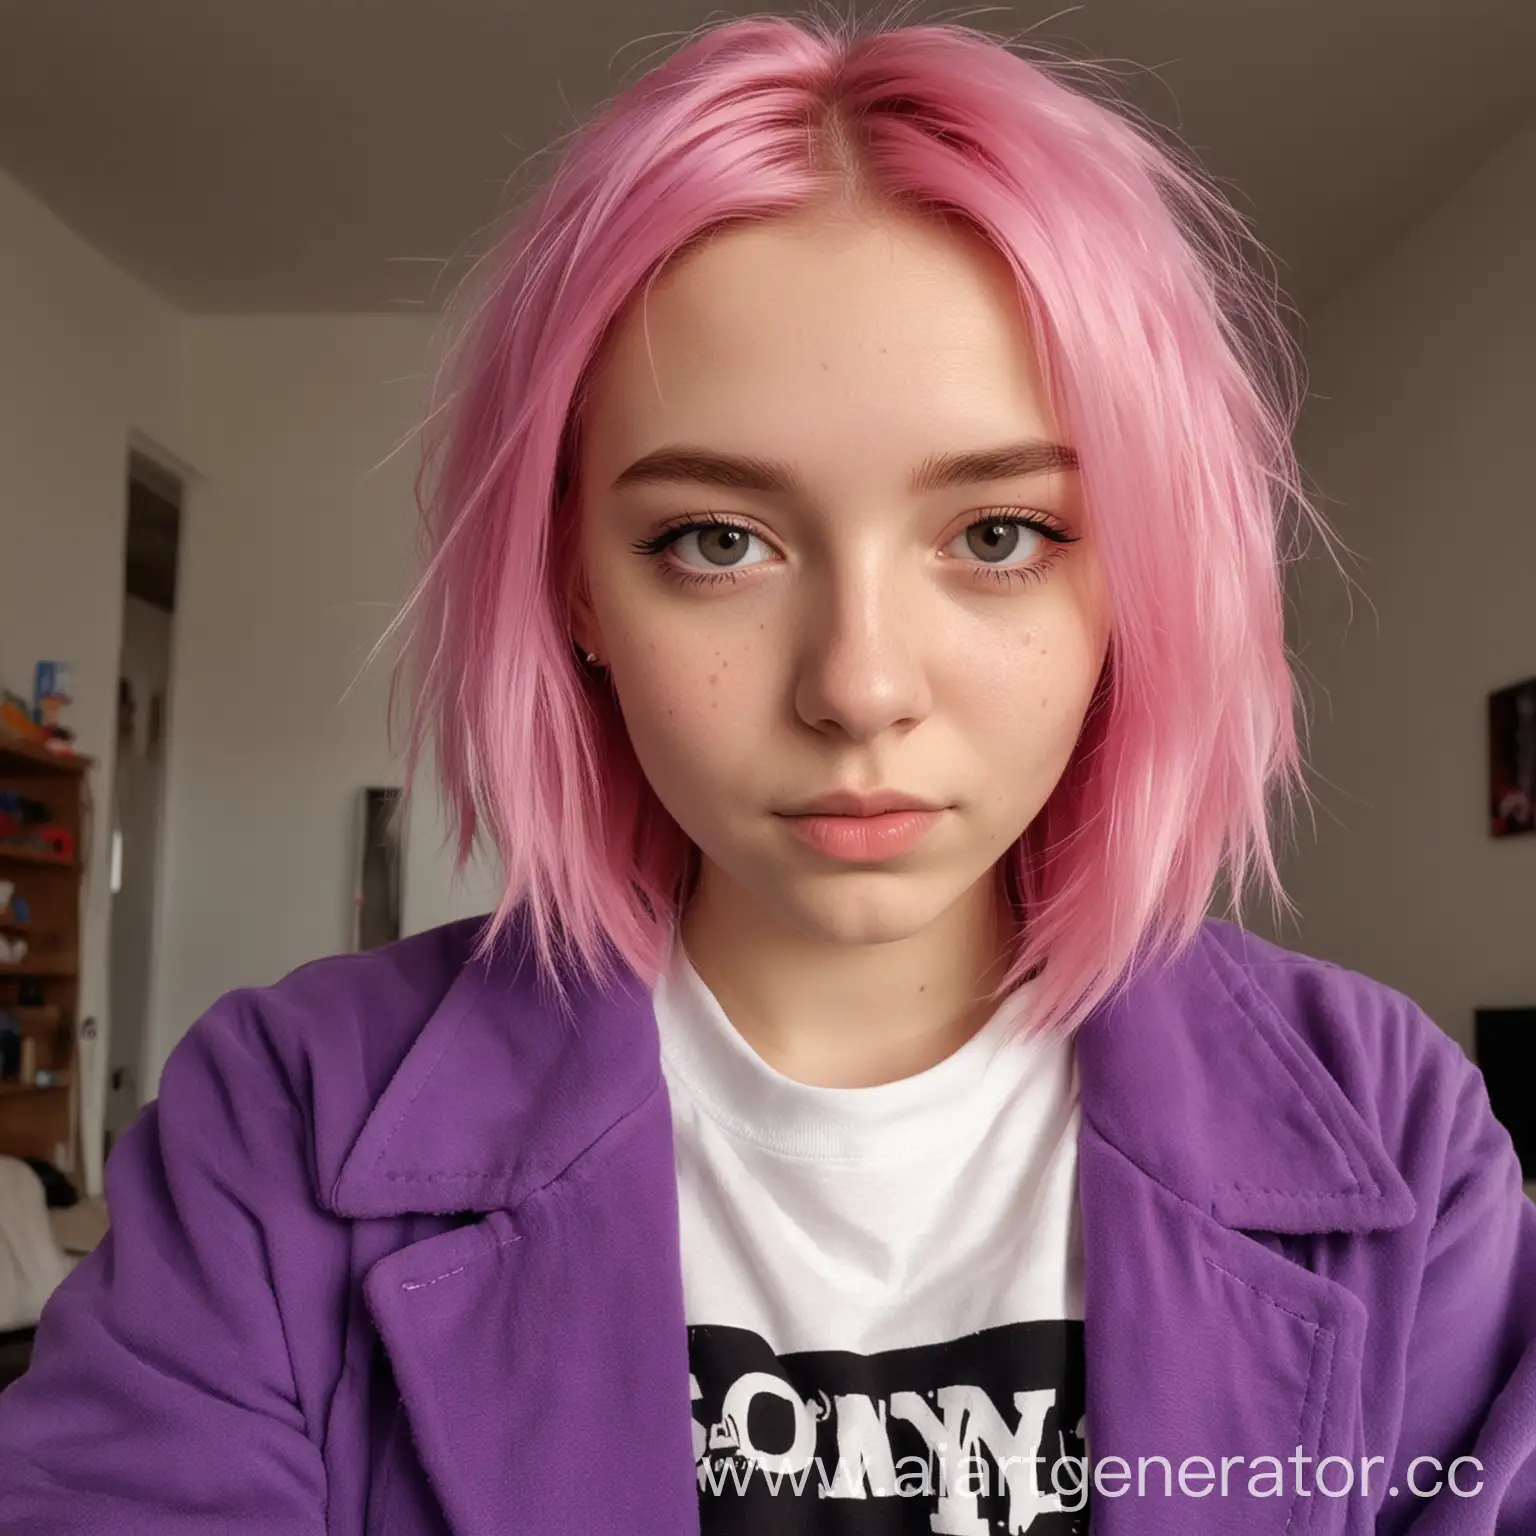 Stylish-18YearOld-Girl-with-Pink-Hair-in-SonyInspired-Attire